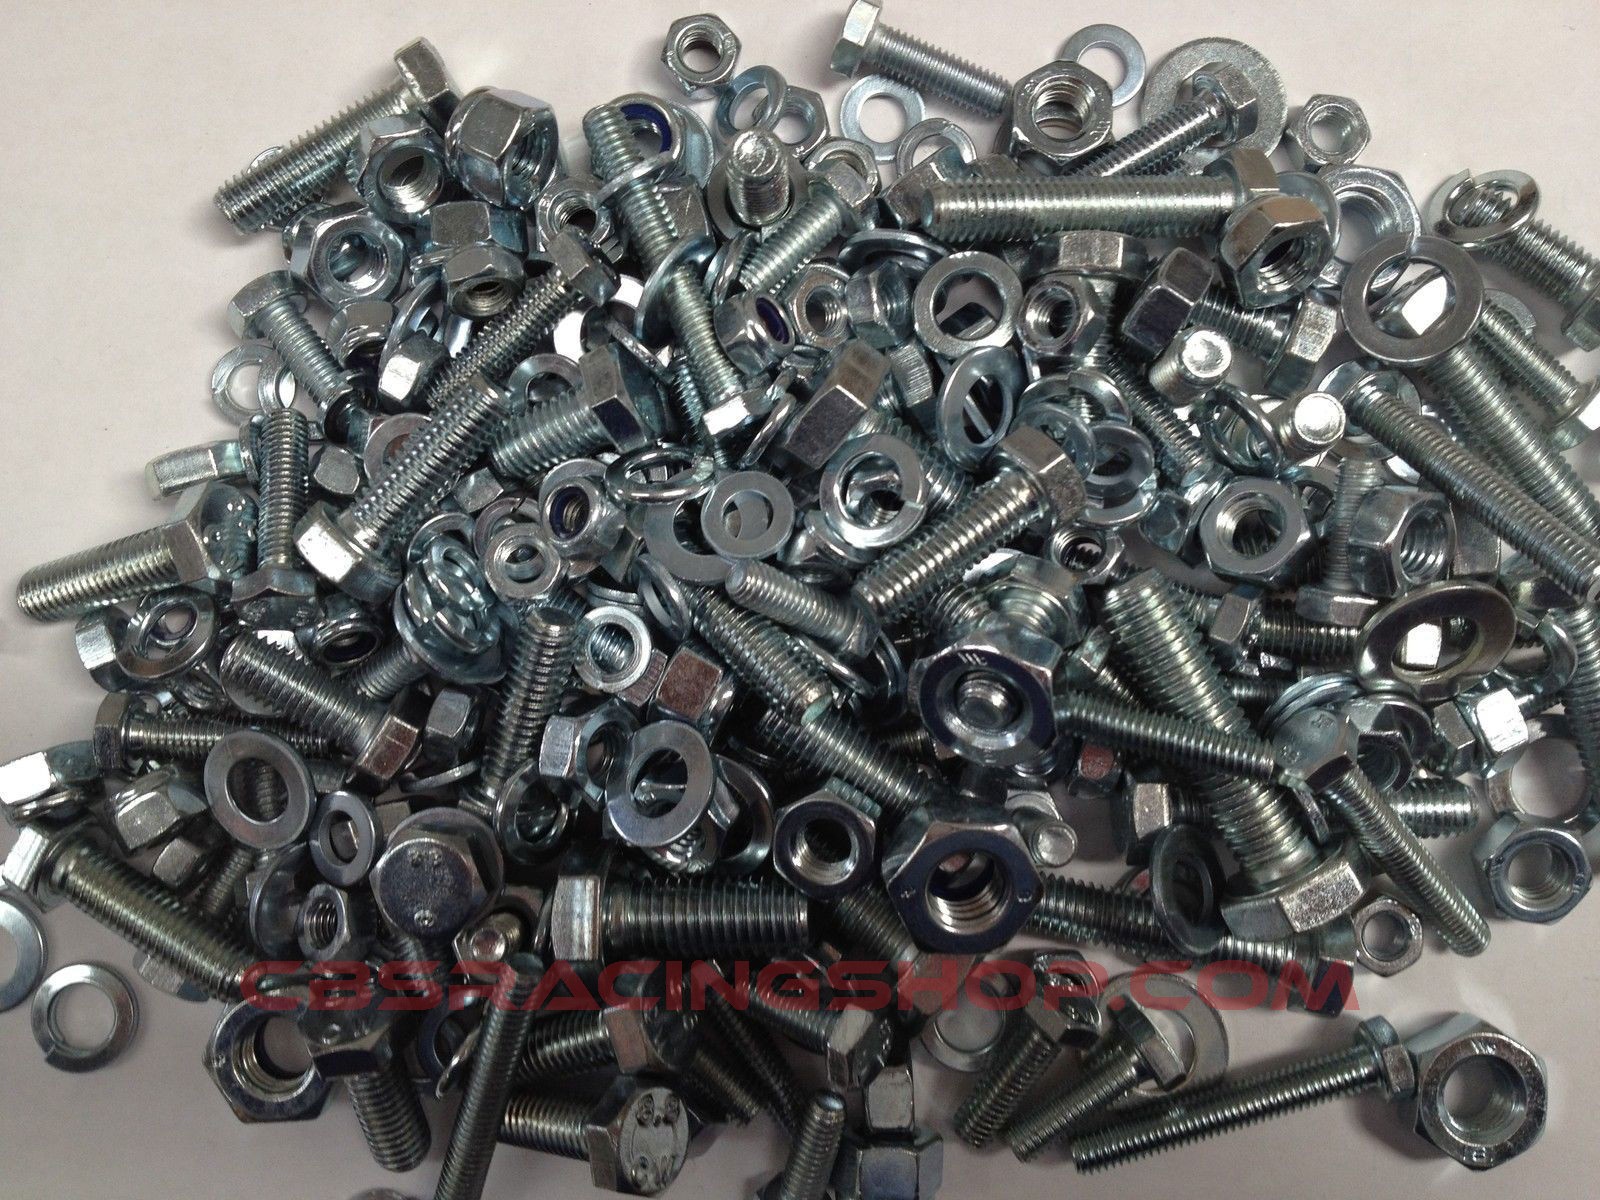 Afbeelding voor categorie Nuts, Bolts & Washers